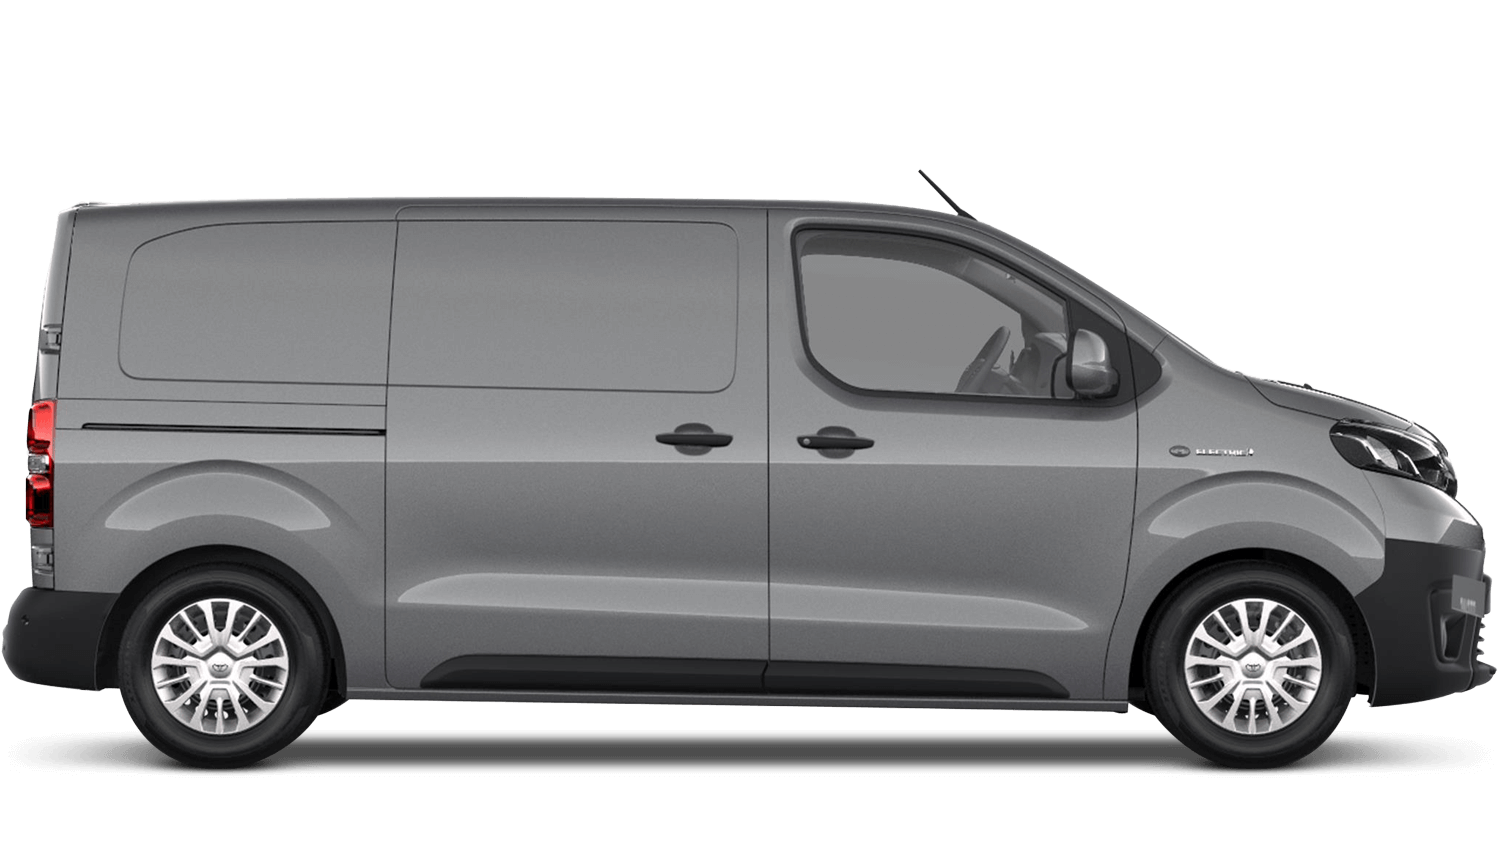 Proace Electric (Hire Purchase) With 0% APR Representative* and £1000 Deposit Contribution*